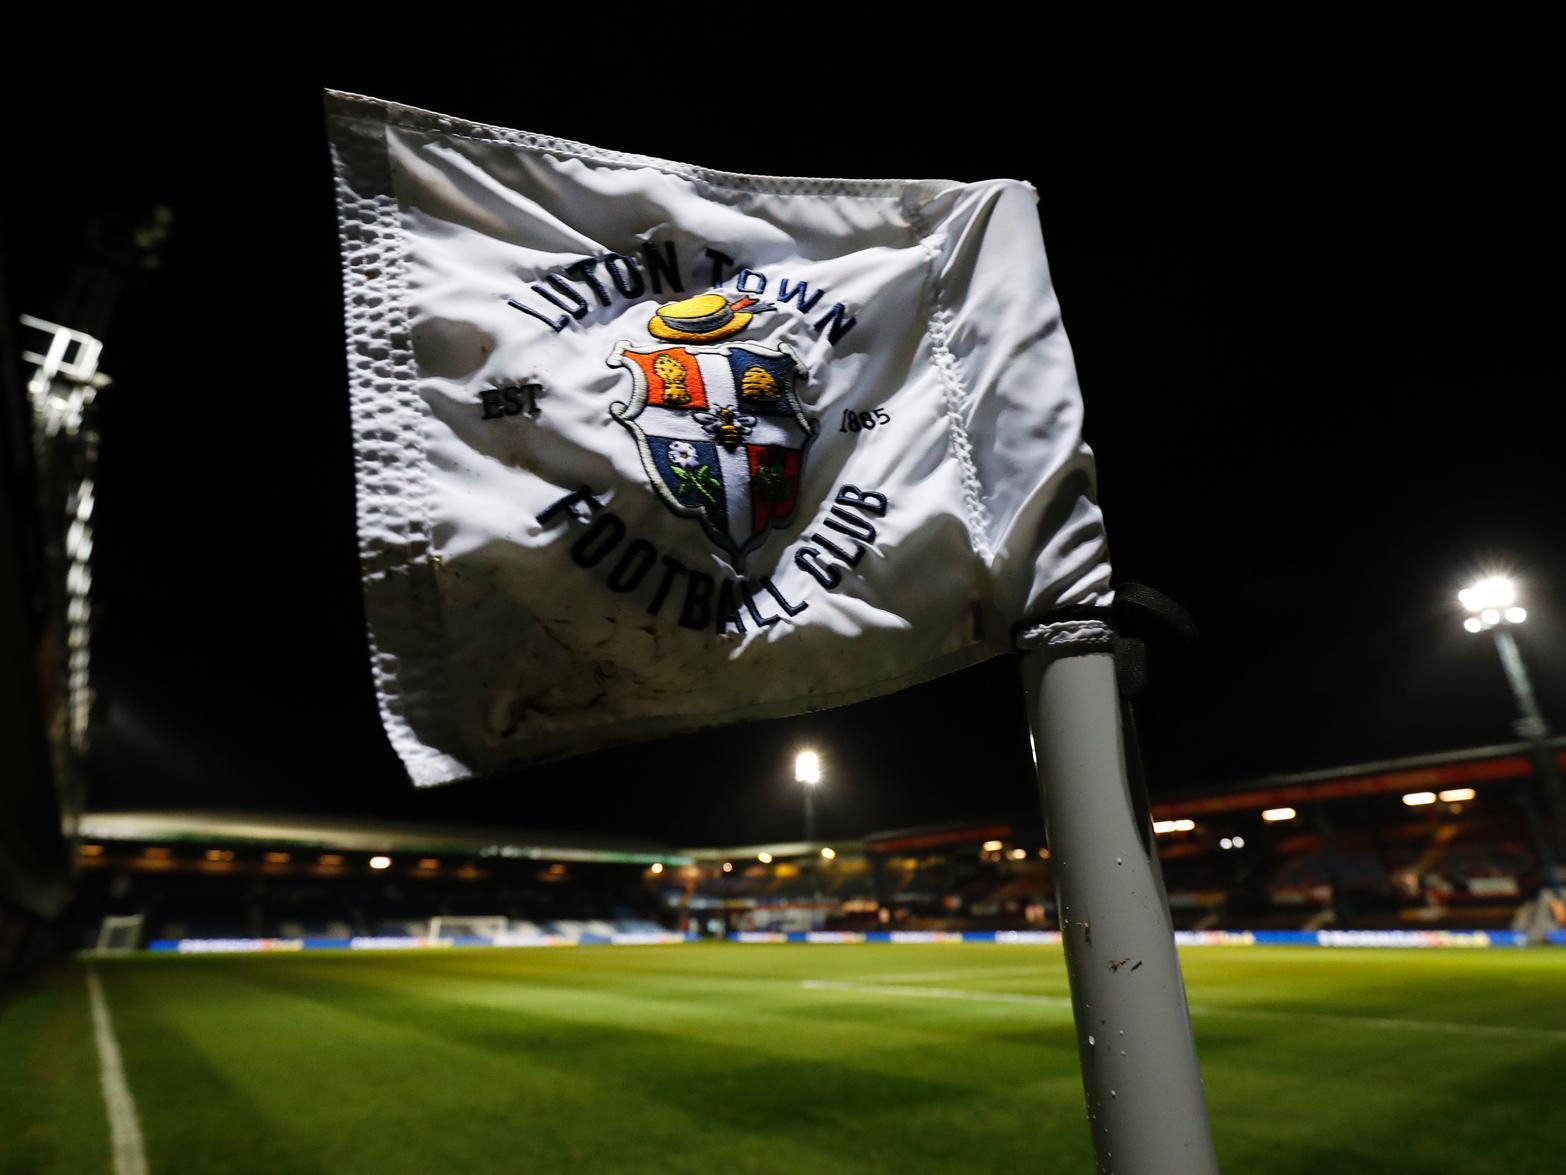 Luton Town's chief executive has branded the Championship as a financial "mad house", and has urged the division to look into imposing a salary cap to ensure a fairer playing field. (BBC Sport)